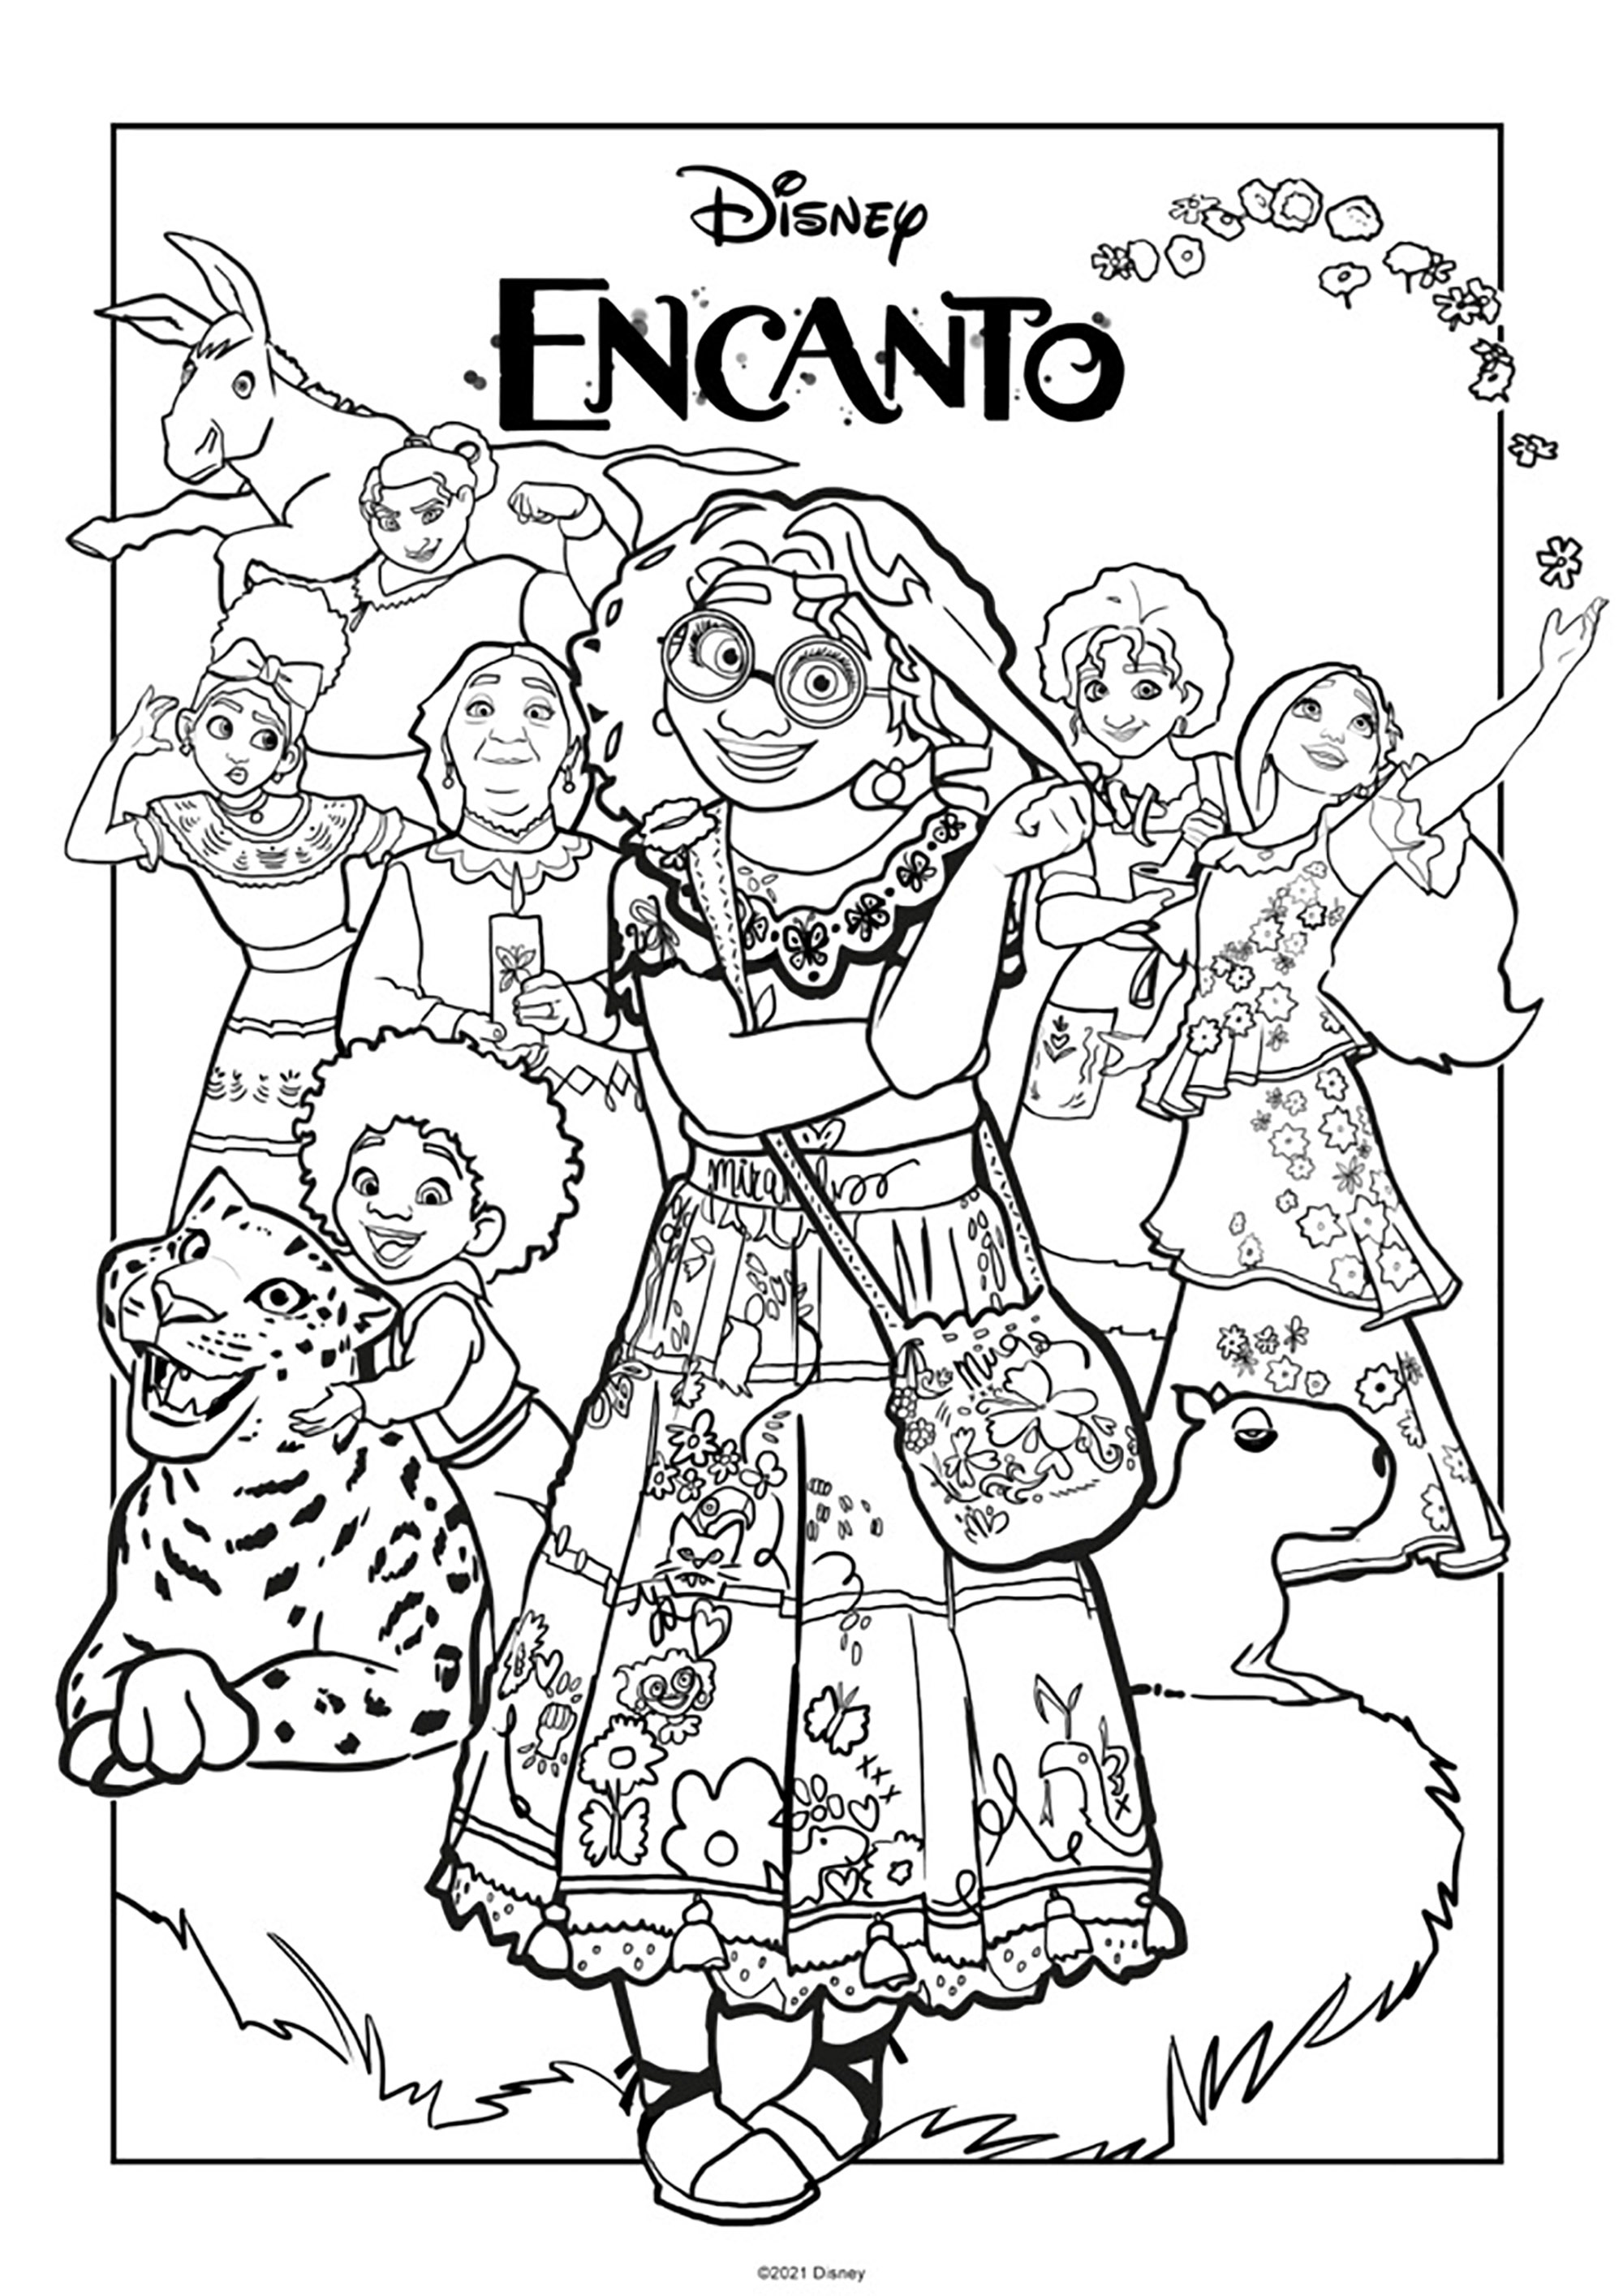 Encanto coloring pages: Mirabel Madrigal and other characters from the film  - Encanto Kids Coloring Pages